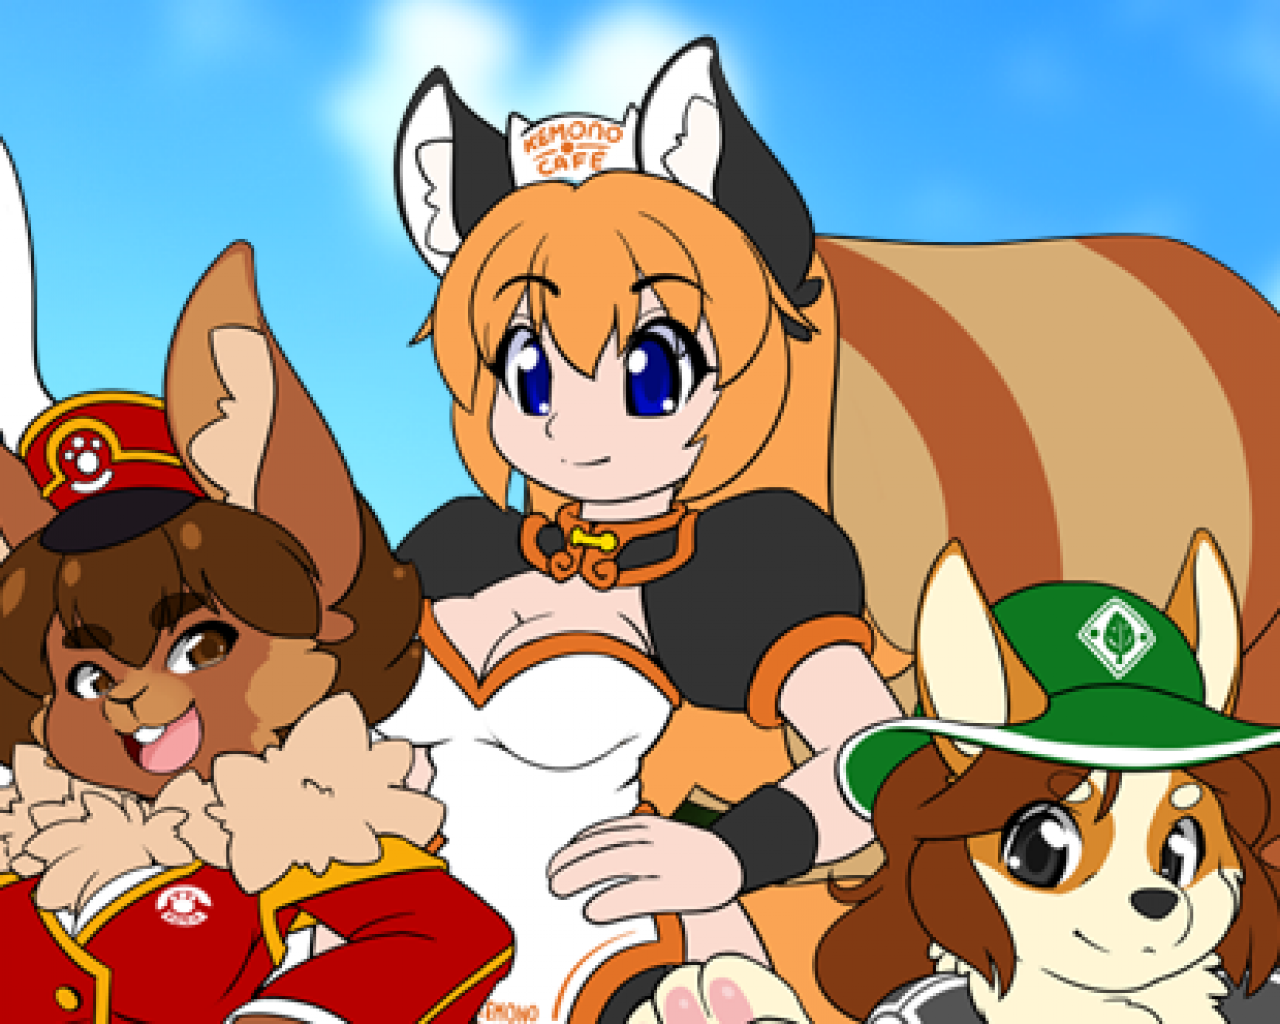 Poster Image for Kemono Cafe